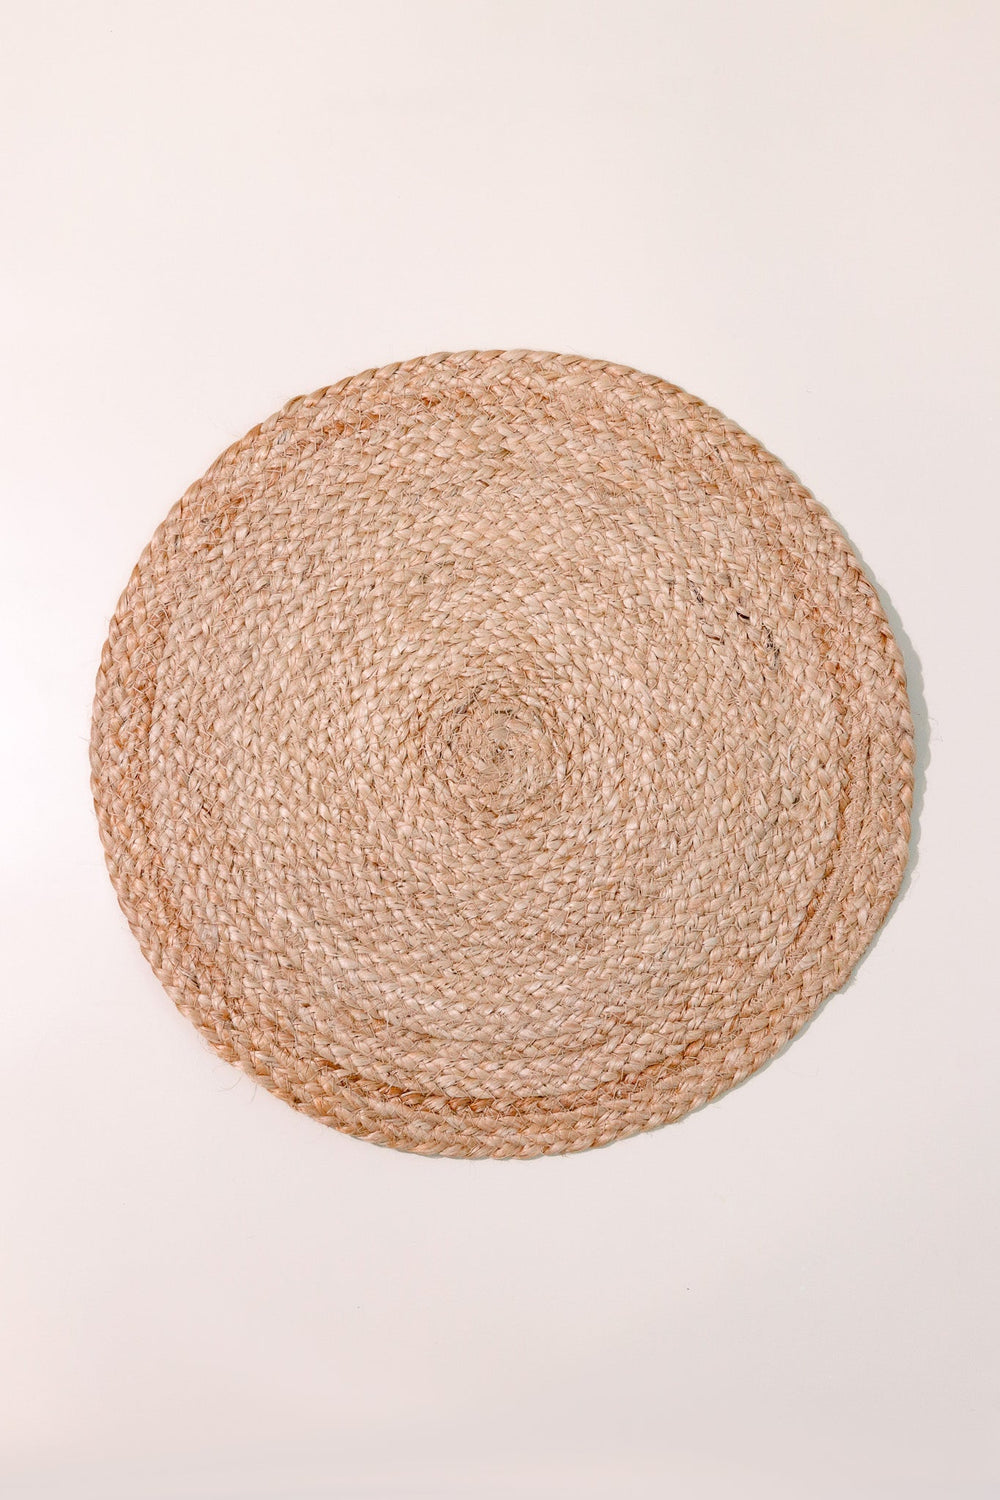 Makuri Woven Seagrass Placemat - Heyday